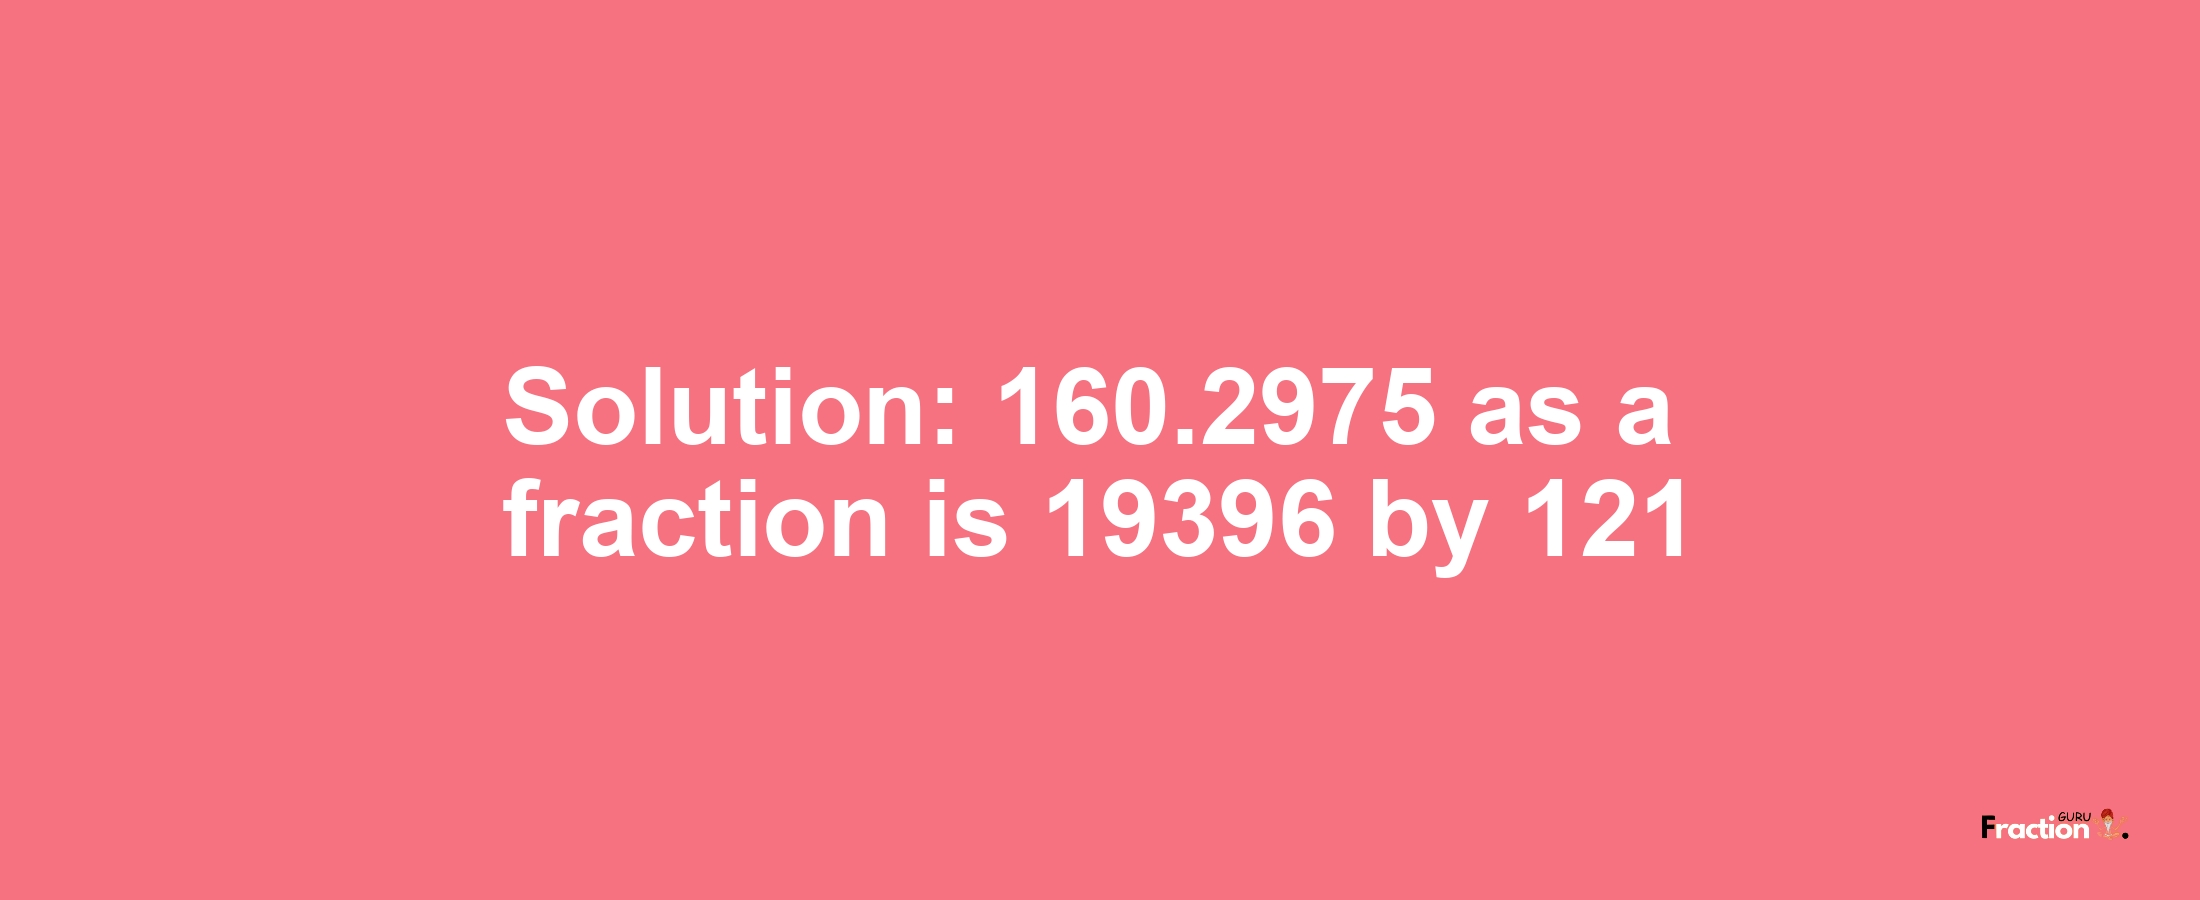 Solution:160.2975 as a fraction is 19396/121